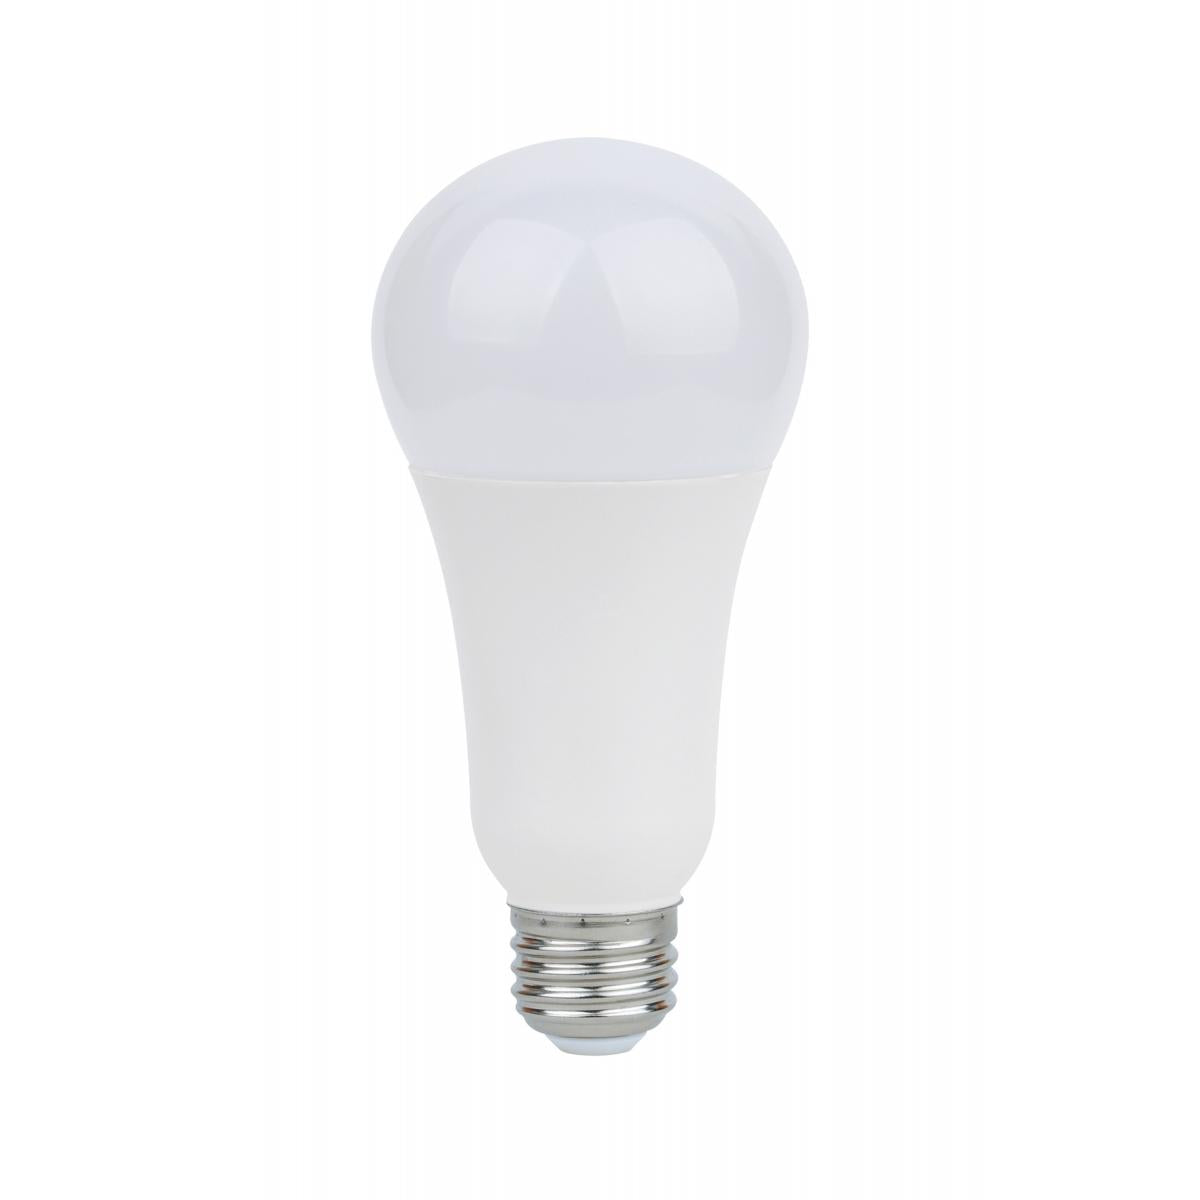 Replacement for Bulbrite 101201 200A/CL/HL 200W A23 CLEAR HL Incandescent 120V - NOW LED S11329